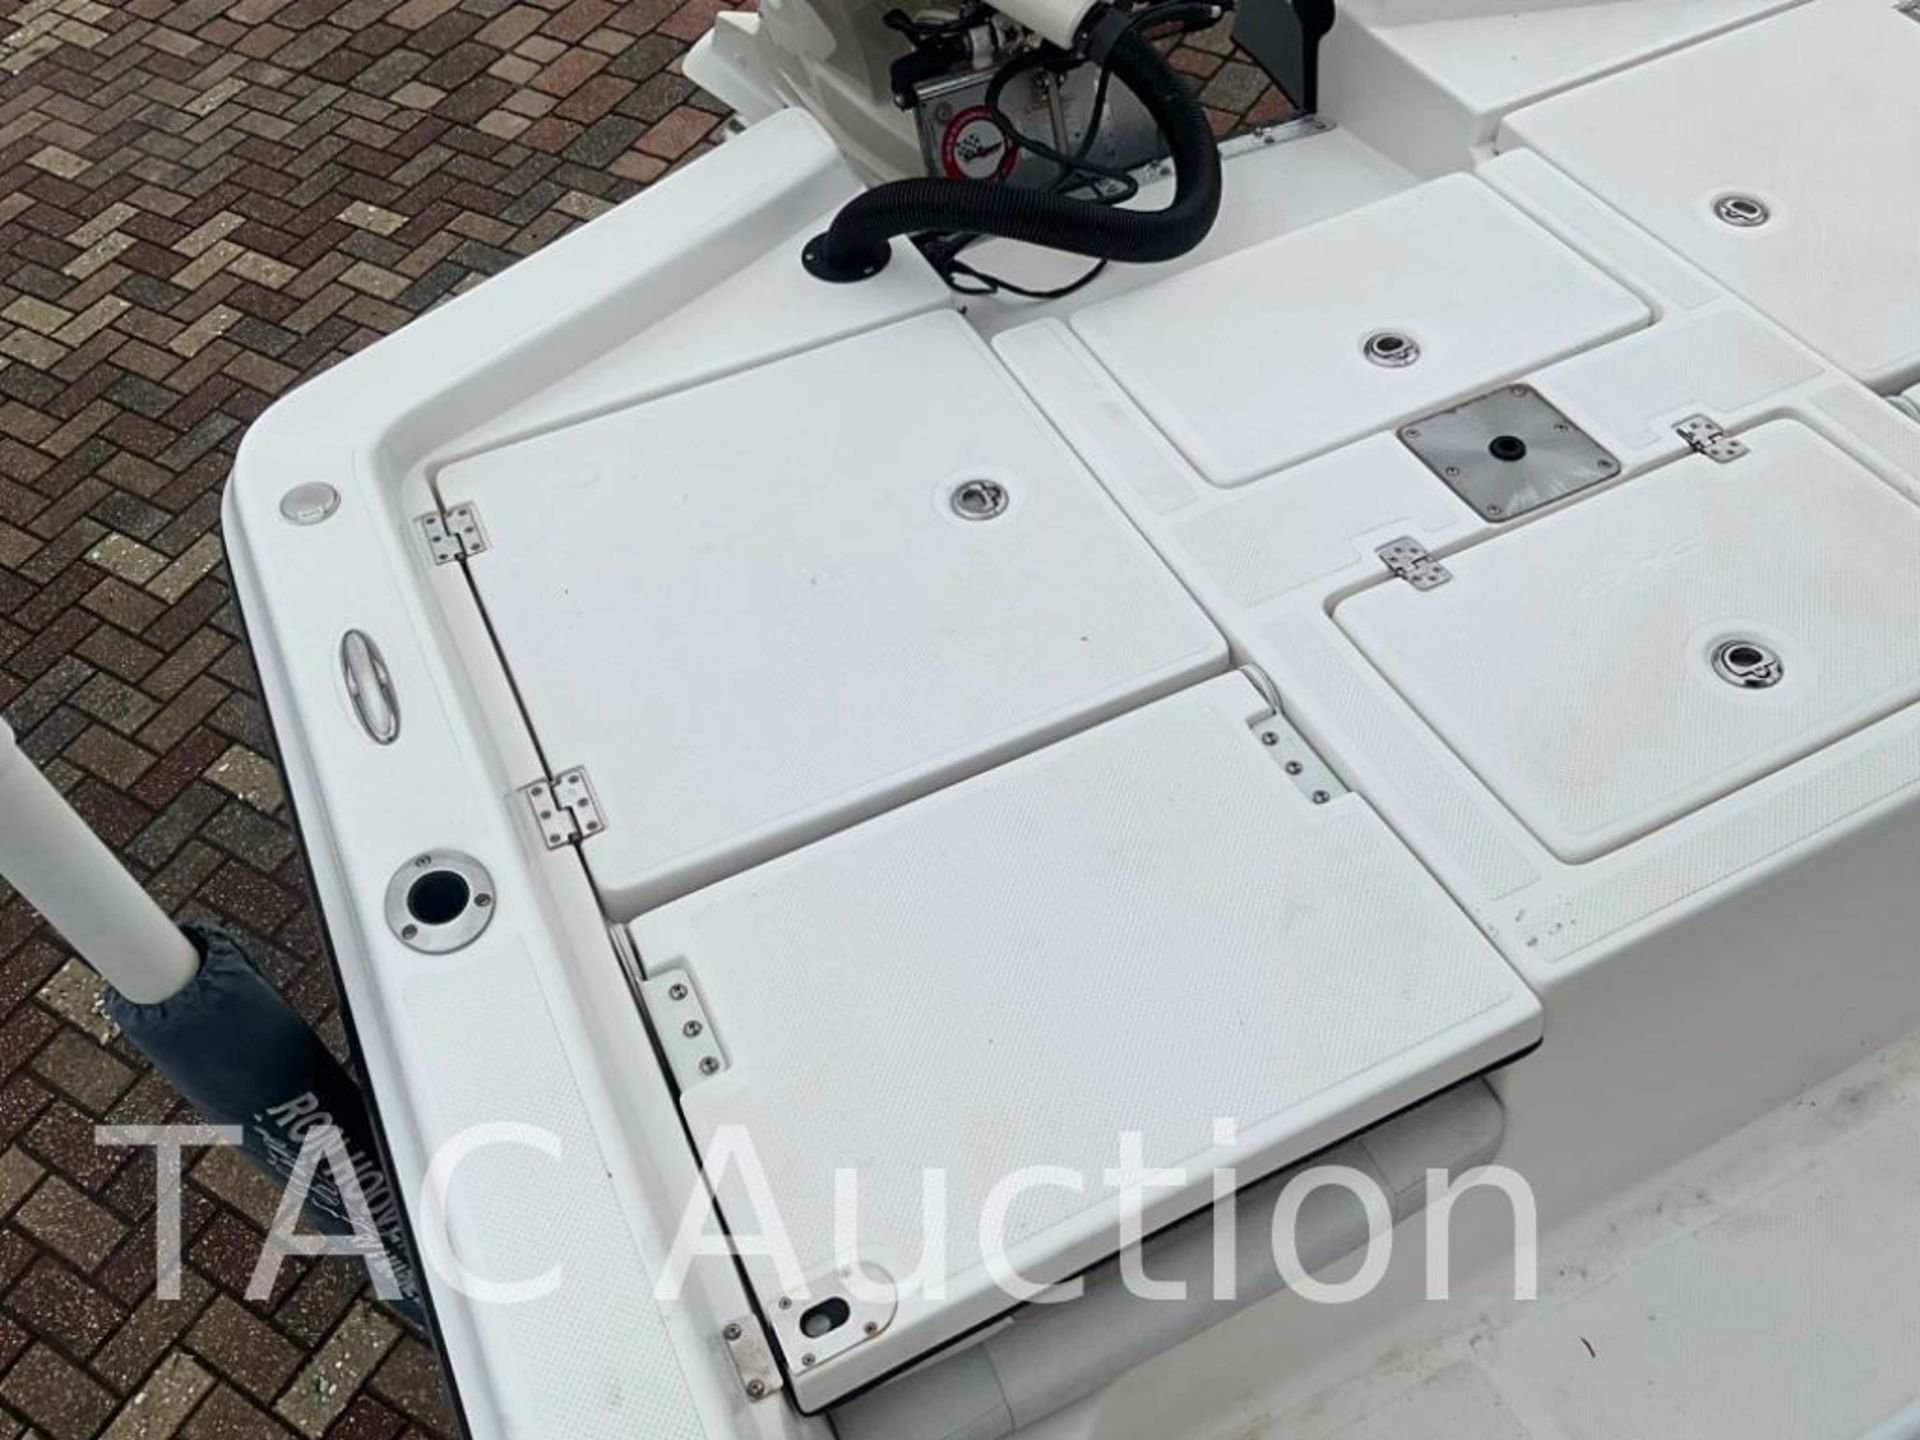 2019 Epic 24ft Bay Center Console - Image 17 of 48